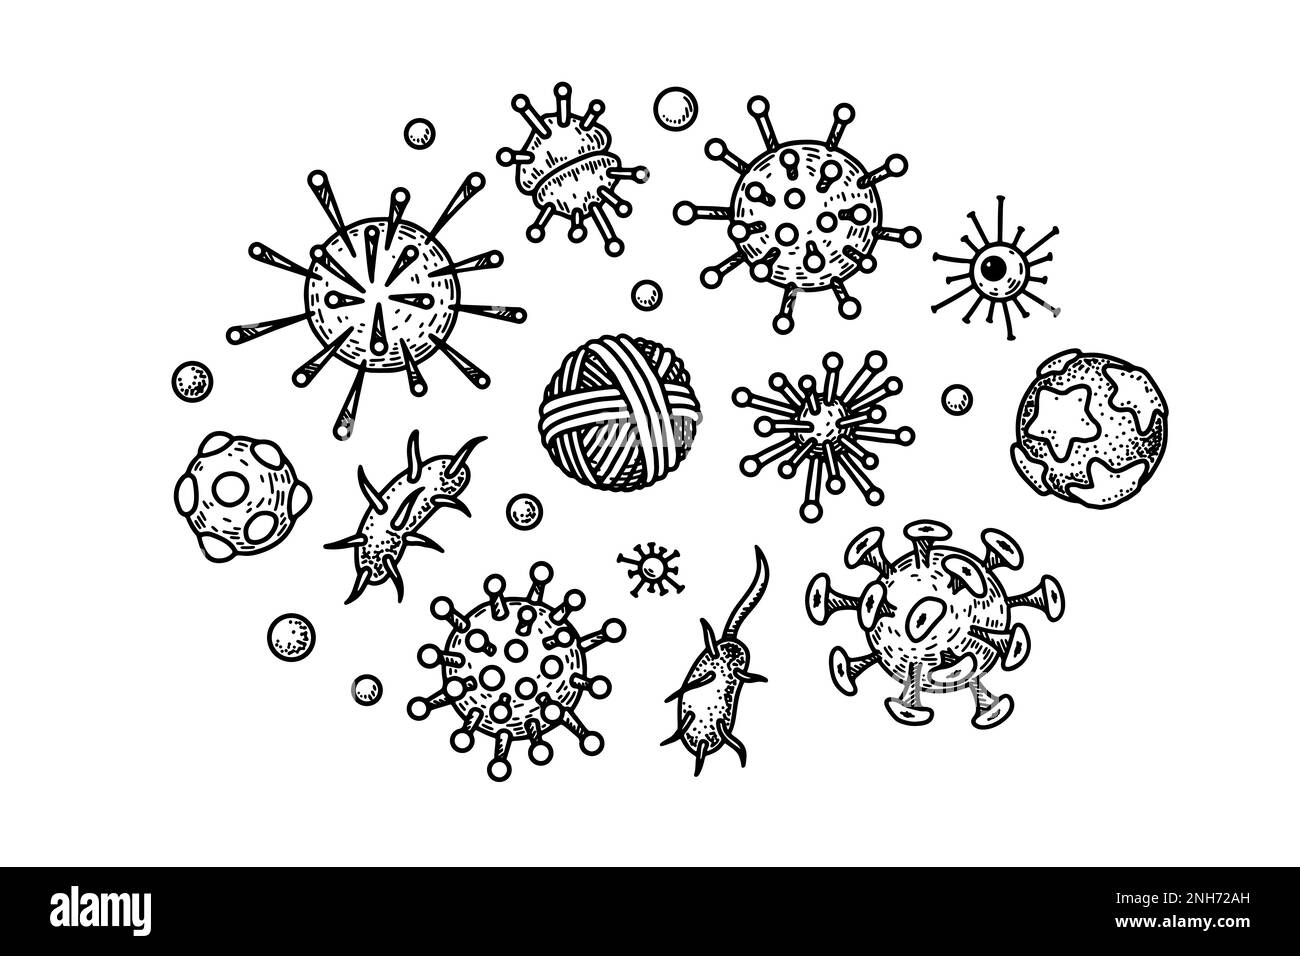 Set of hand drawn human viruses. Vector illustration in sketch style. Realistic microbiology scientific design Stock Vector